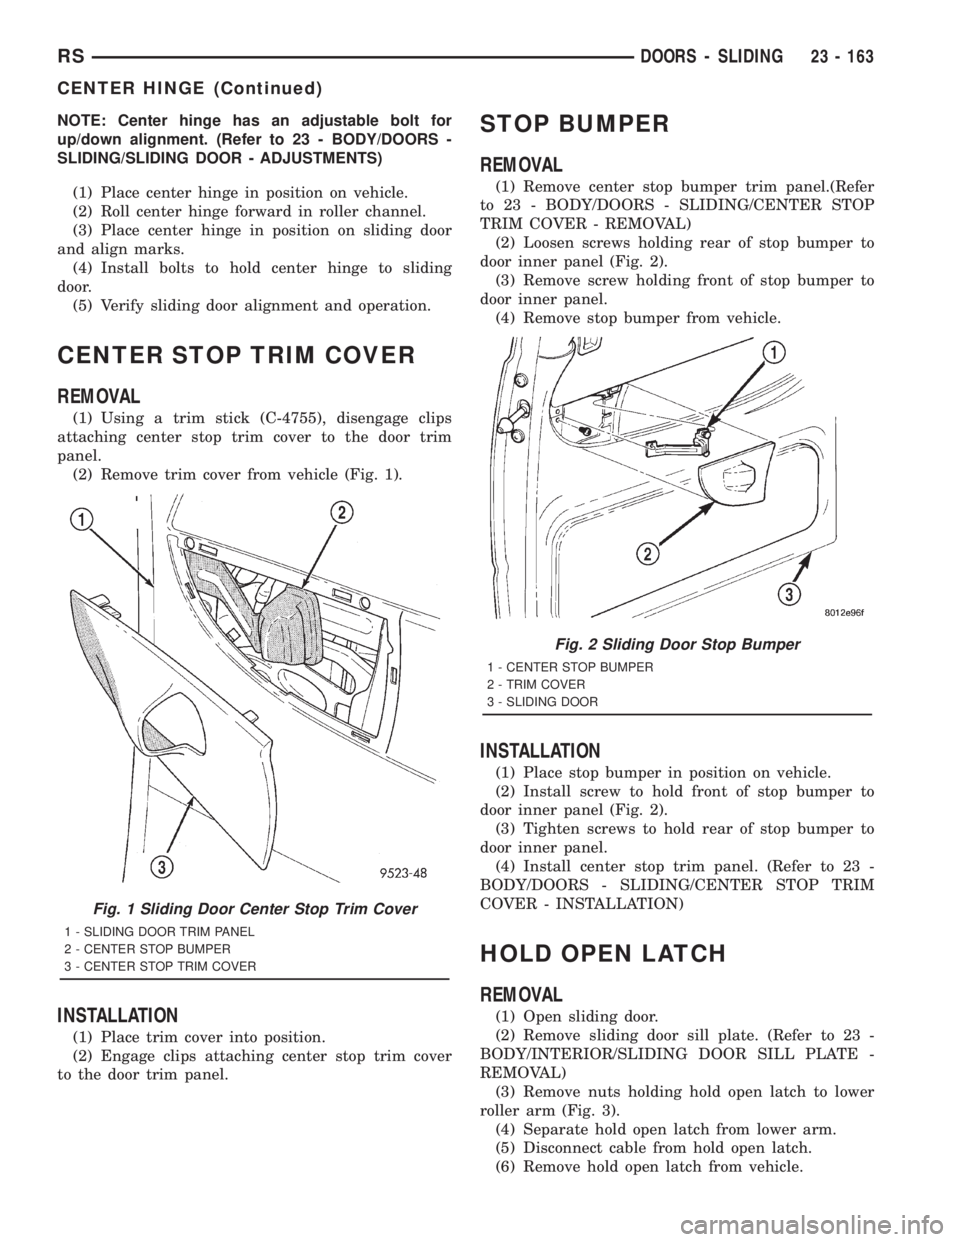 CHRYSLER VOYAGER 2001  Service Manual NOTE: Center hinge has an adjustable bolt for
up/down alignment. (Refer to 23 - BODY/DOORS -
SLIDING/SLIDING DOOR - ADJUSTMENTS)
(1) Place center hinge in position on vehicle.
(2) Roll center hinge fo